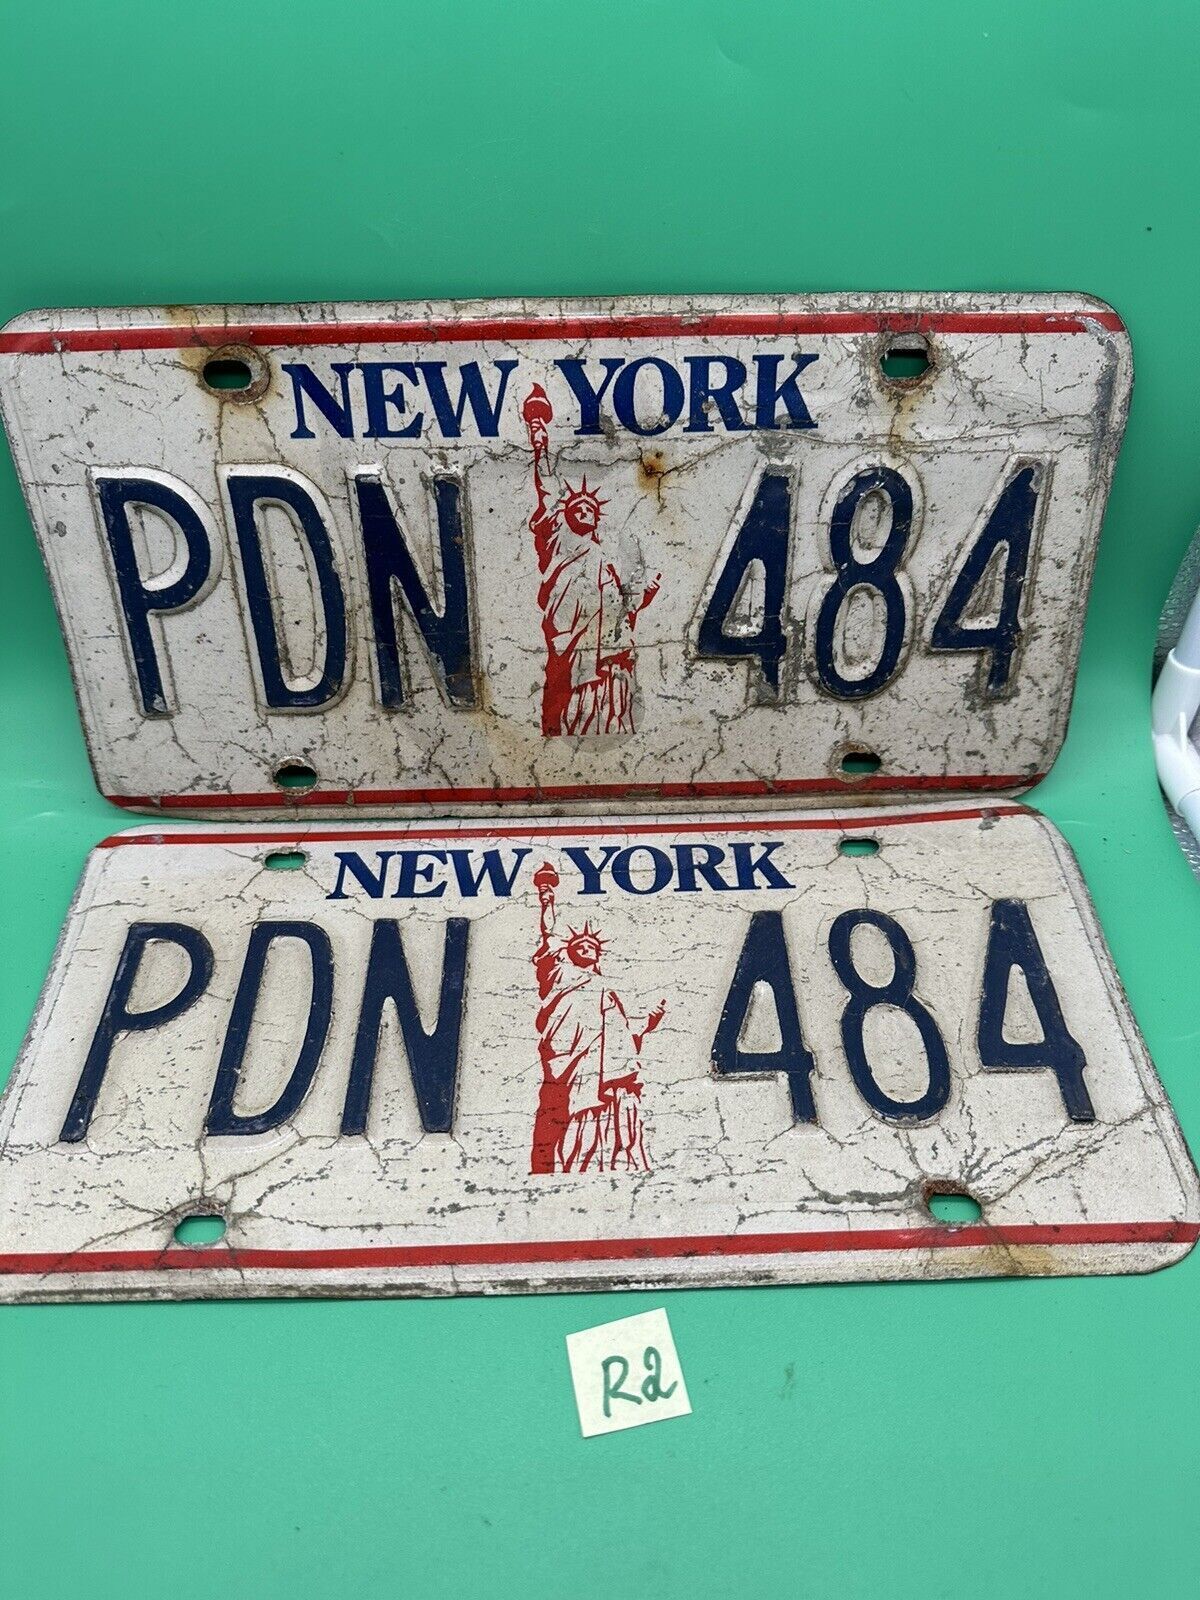 Vintage NEW YORK Statue of Liberty 1986-2000 License Plate PAIR - #PDN-484